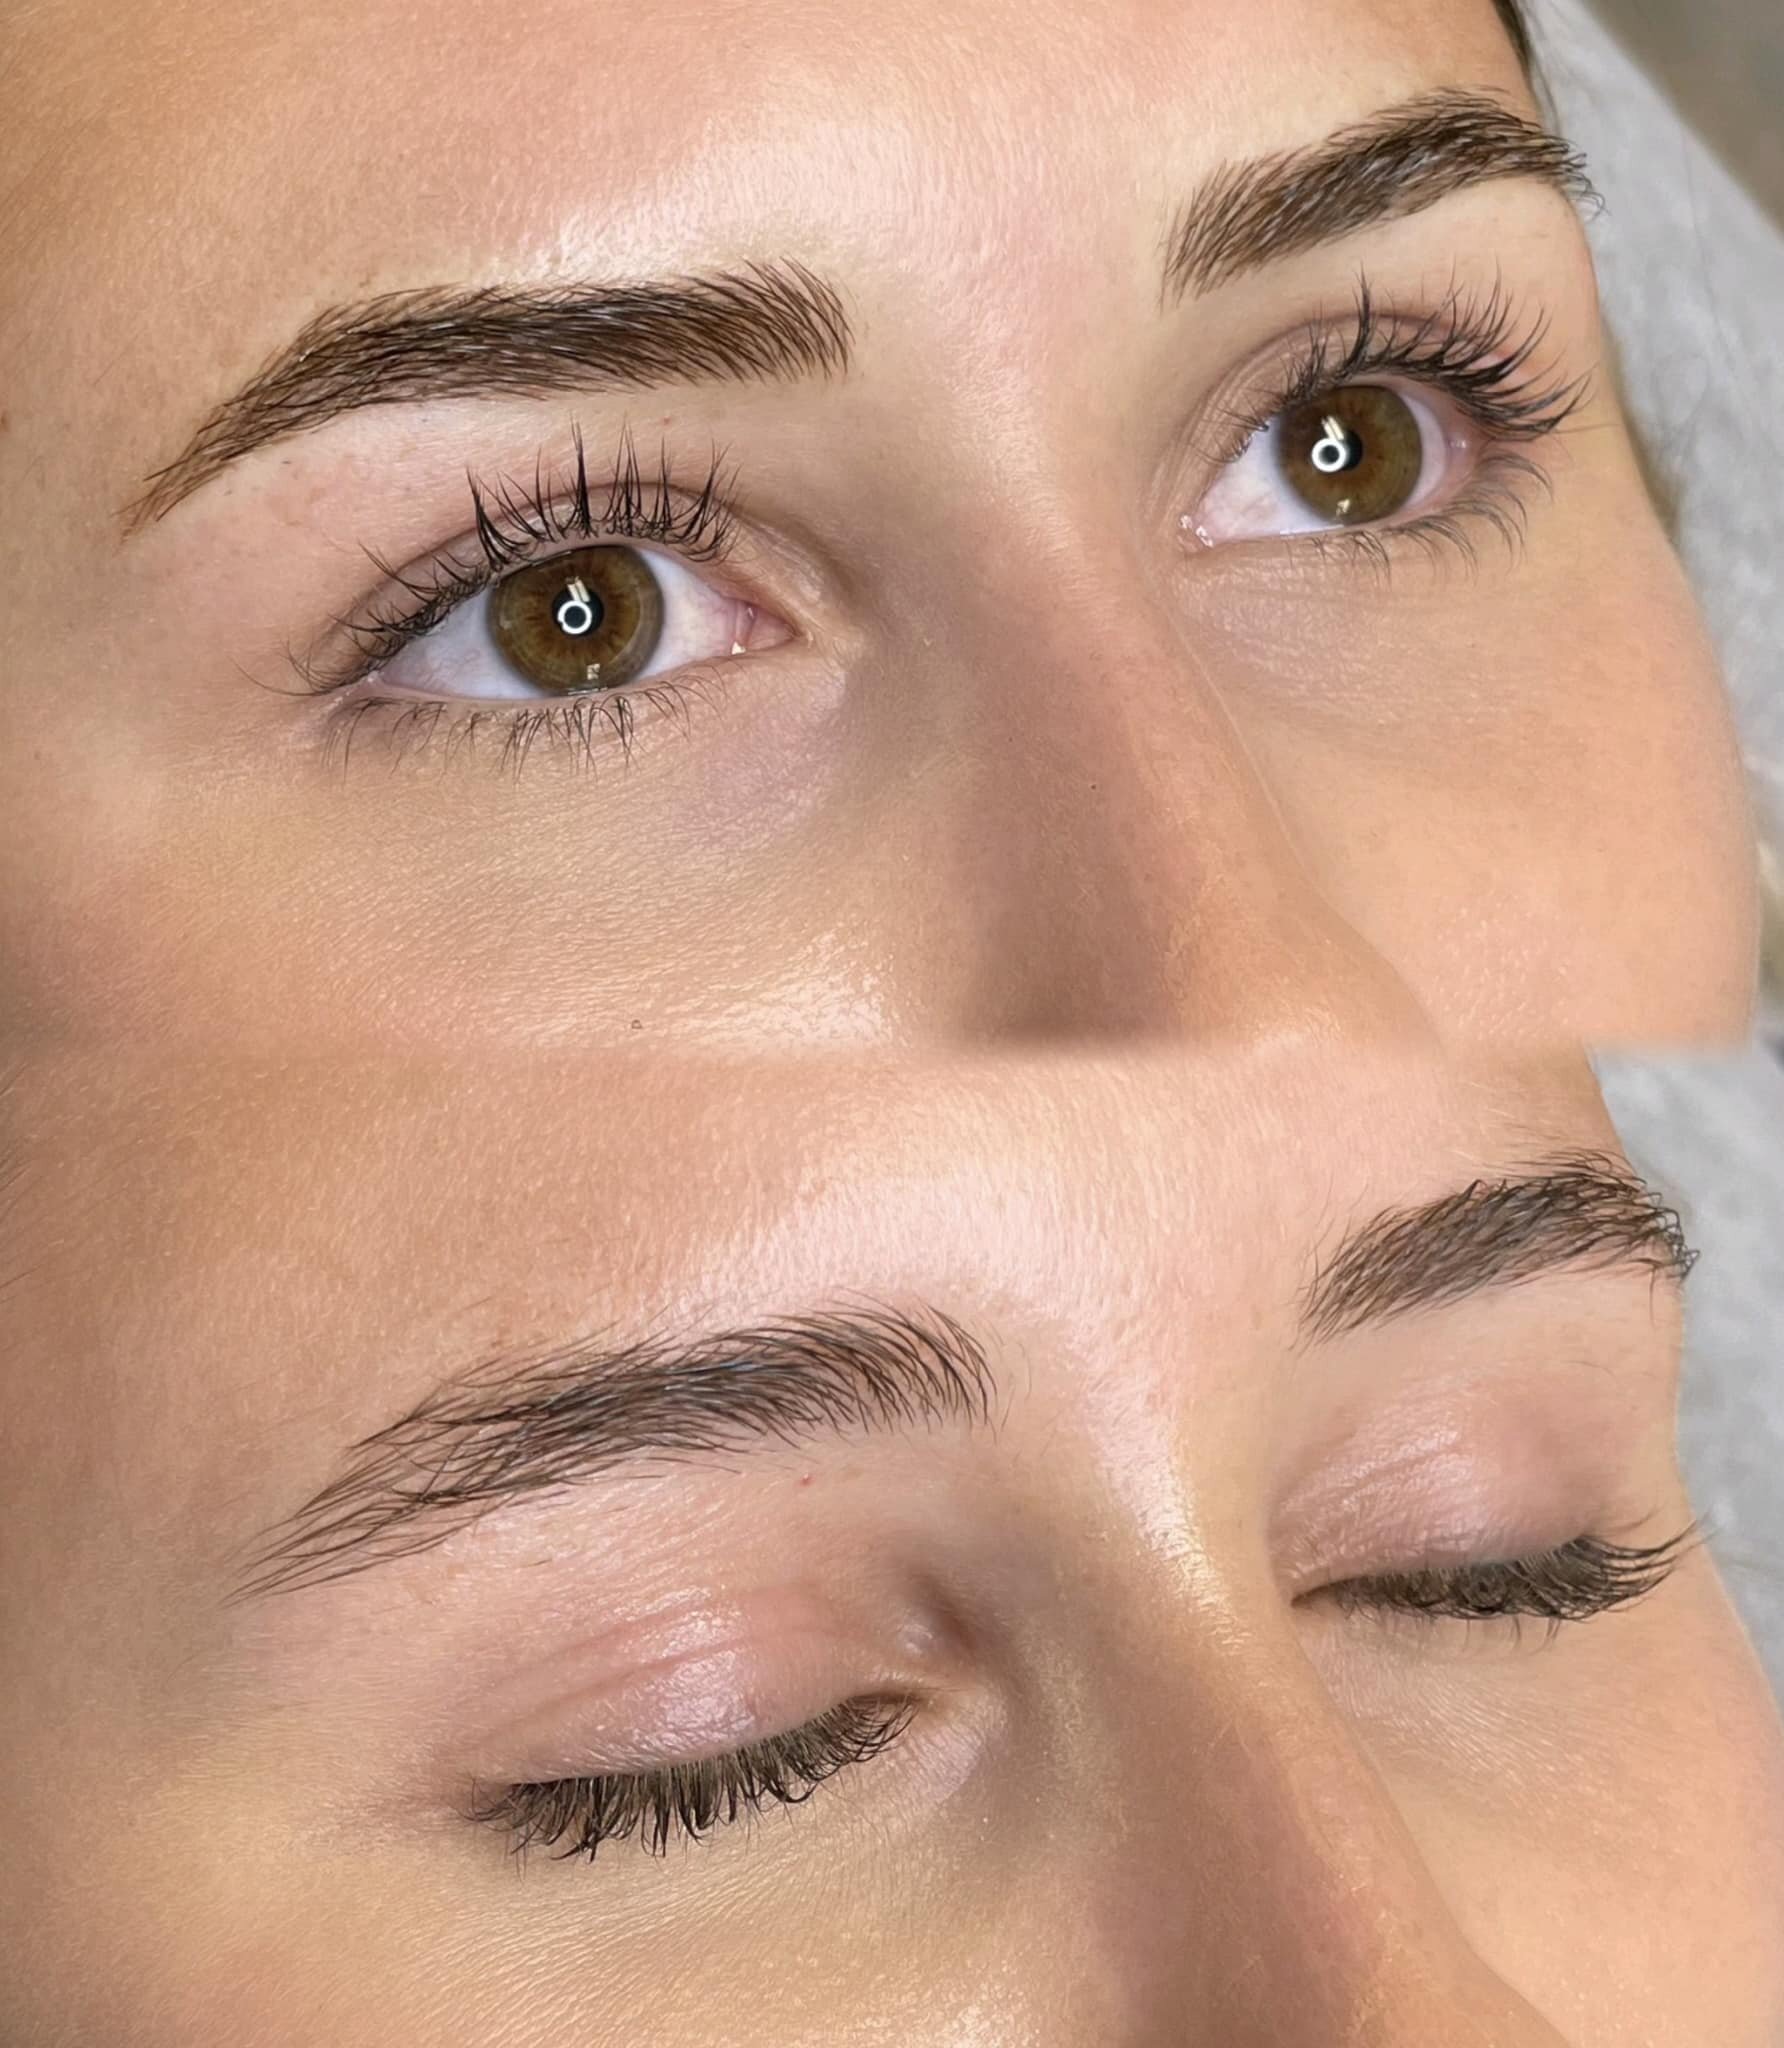 Are you ready for new brows❓ 📅 To book an appointment, please go to https://www.domicroblading.com, 👩&zwj;💻 brows@domicroblading.com, or 📲 message us your full name, phone number, email address, a preferred date/time and your requested service. 
